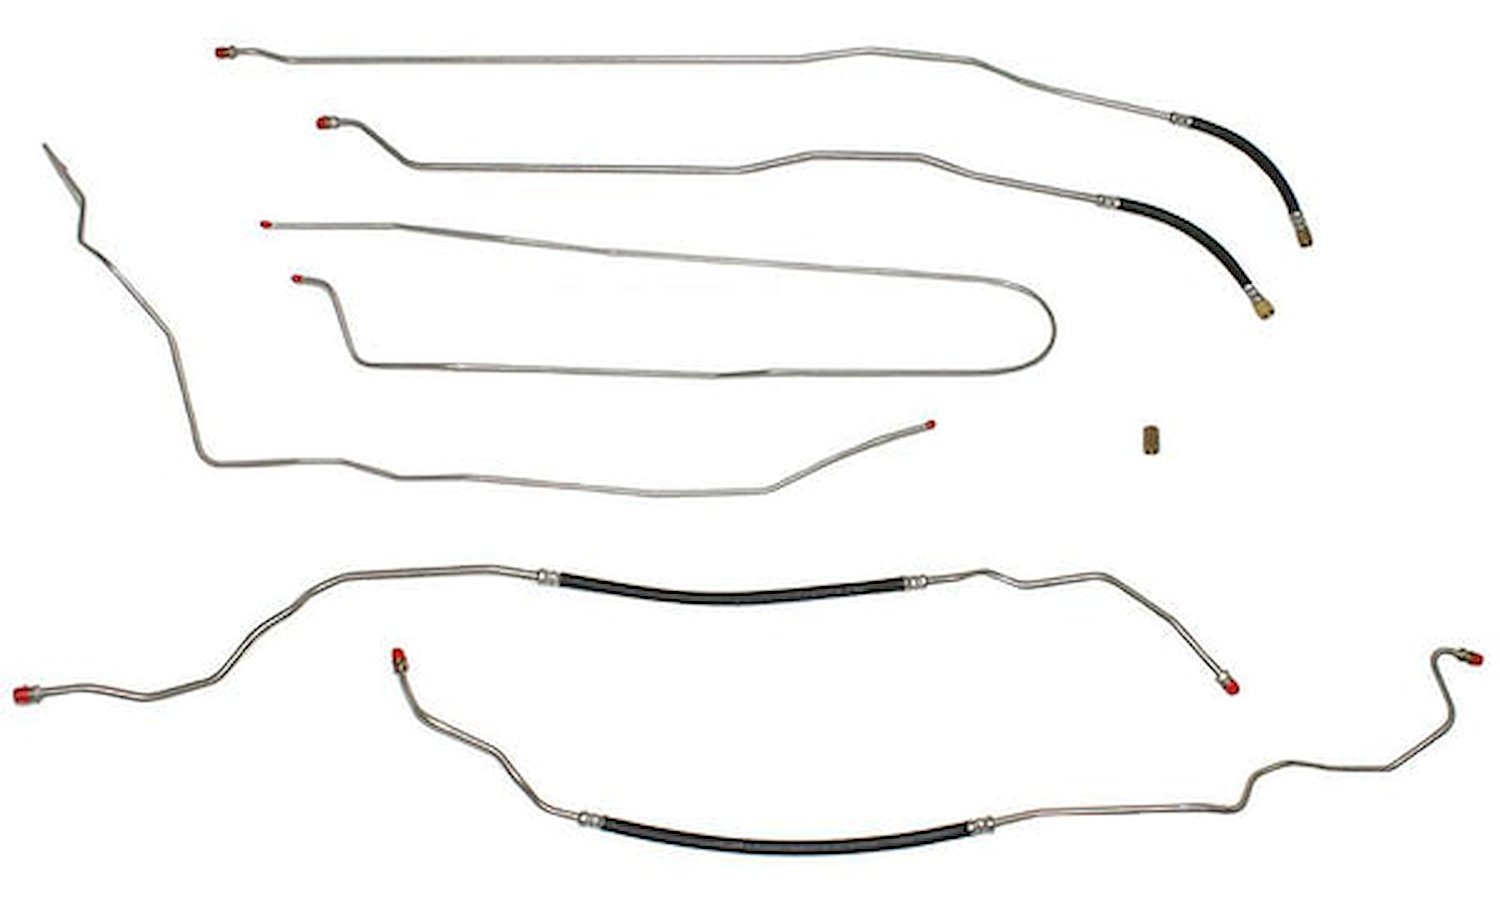 Complete Fuel Line Kit for 1998-2004 Chevy S-10 ZR2 4WD [Stainless Steel]